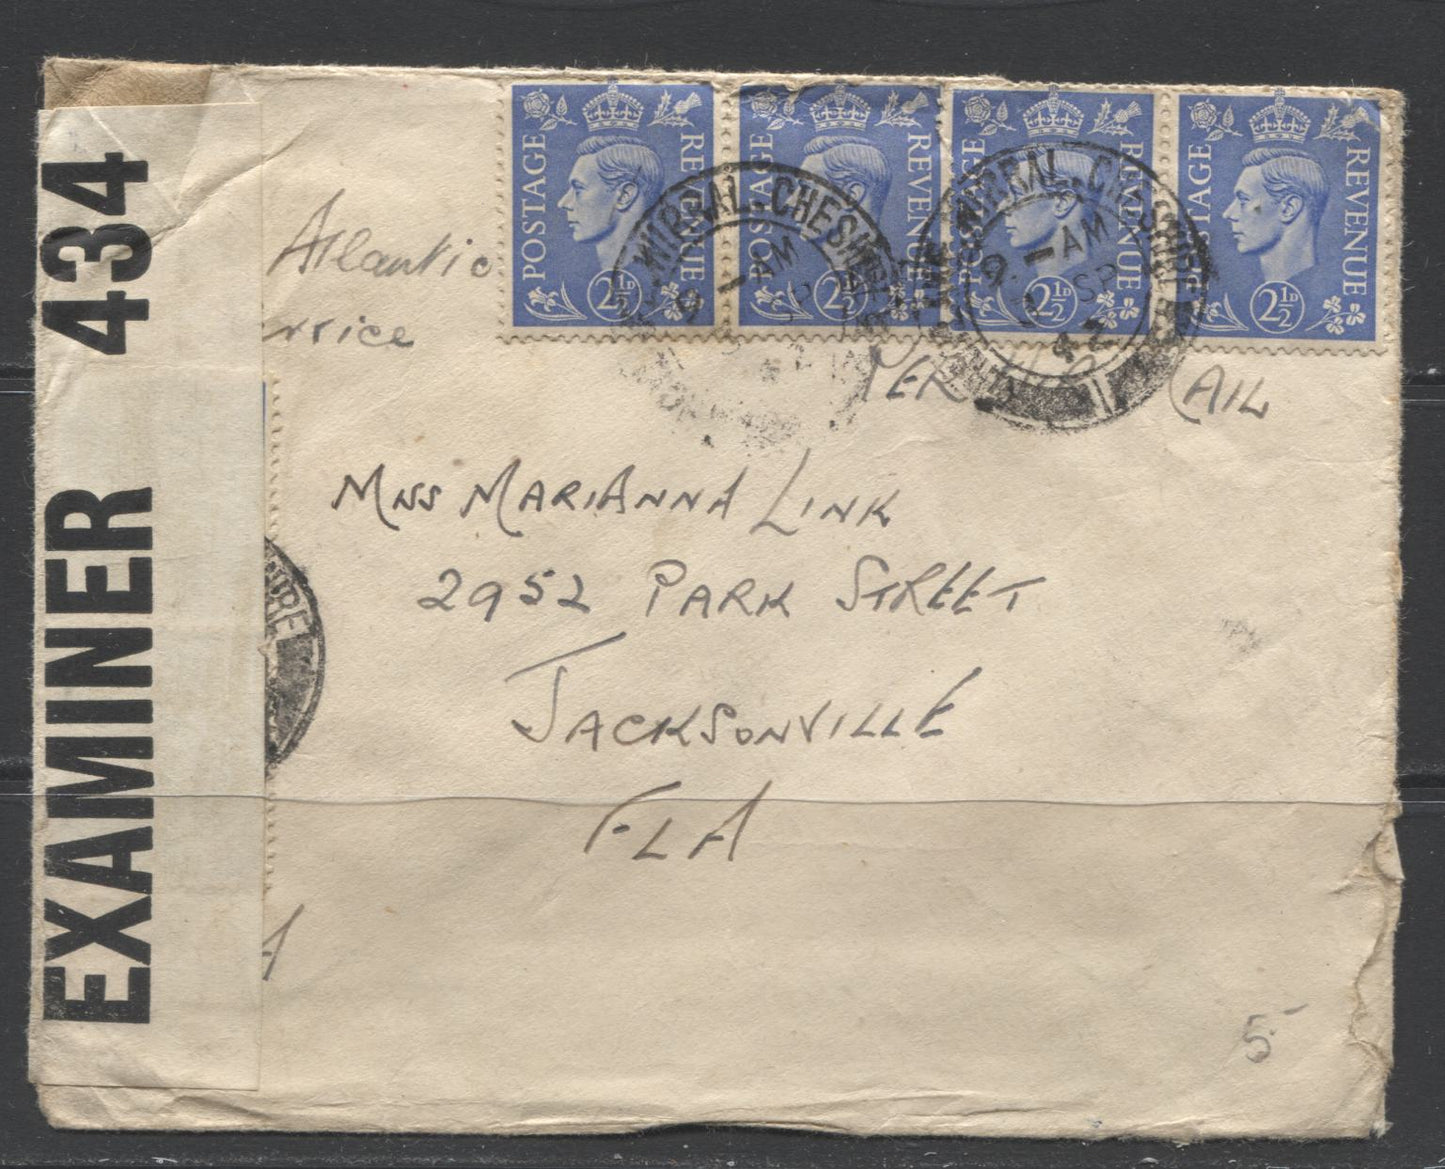 Lot 298 Great Britain #262, Strip Of 4 Used On Censored 10d Rate Cover To Jacksonville, Florida. Unusual Rate, Some Edge Creases